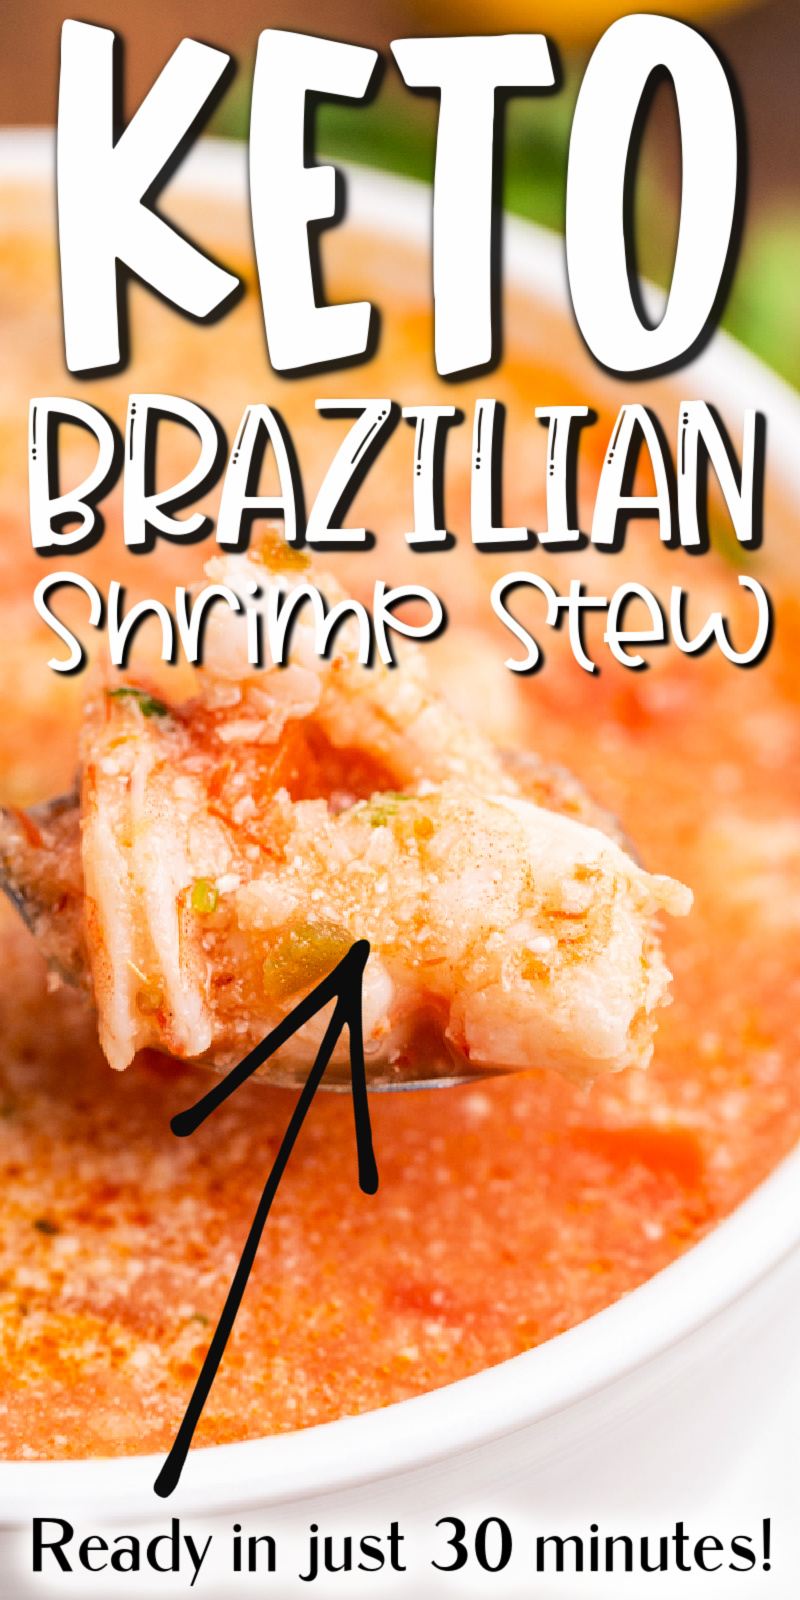 Keto Brazilian Shrimp Stew - This Keto Brazilian Shrimp Stew recipe is my low carb version of the classic Moqueca de Camaroes. It is so incredibly delicious with a creamy coconut and tomato base, plump juicy shrimp, jalapeno, all brightened up with fresh lemon juice. It is easy to make but perfect for any occasion from a fancy get together with friends to a quiet dinner at home with family! #keto #lowcarb #glutenfree #dairyfree #shrimp #seafood #stew #soup #brazilian #easy #quick #recipe